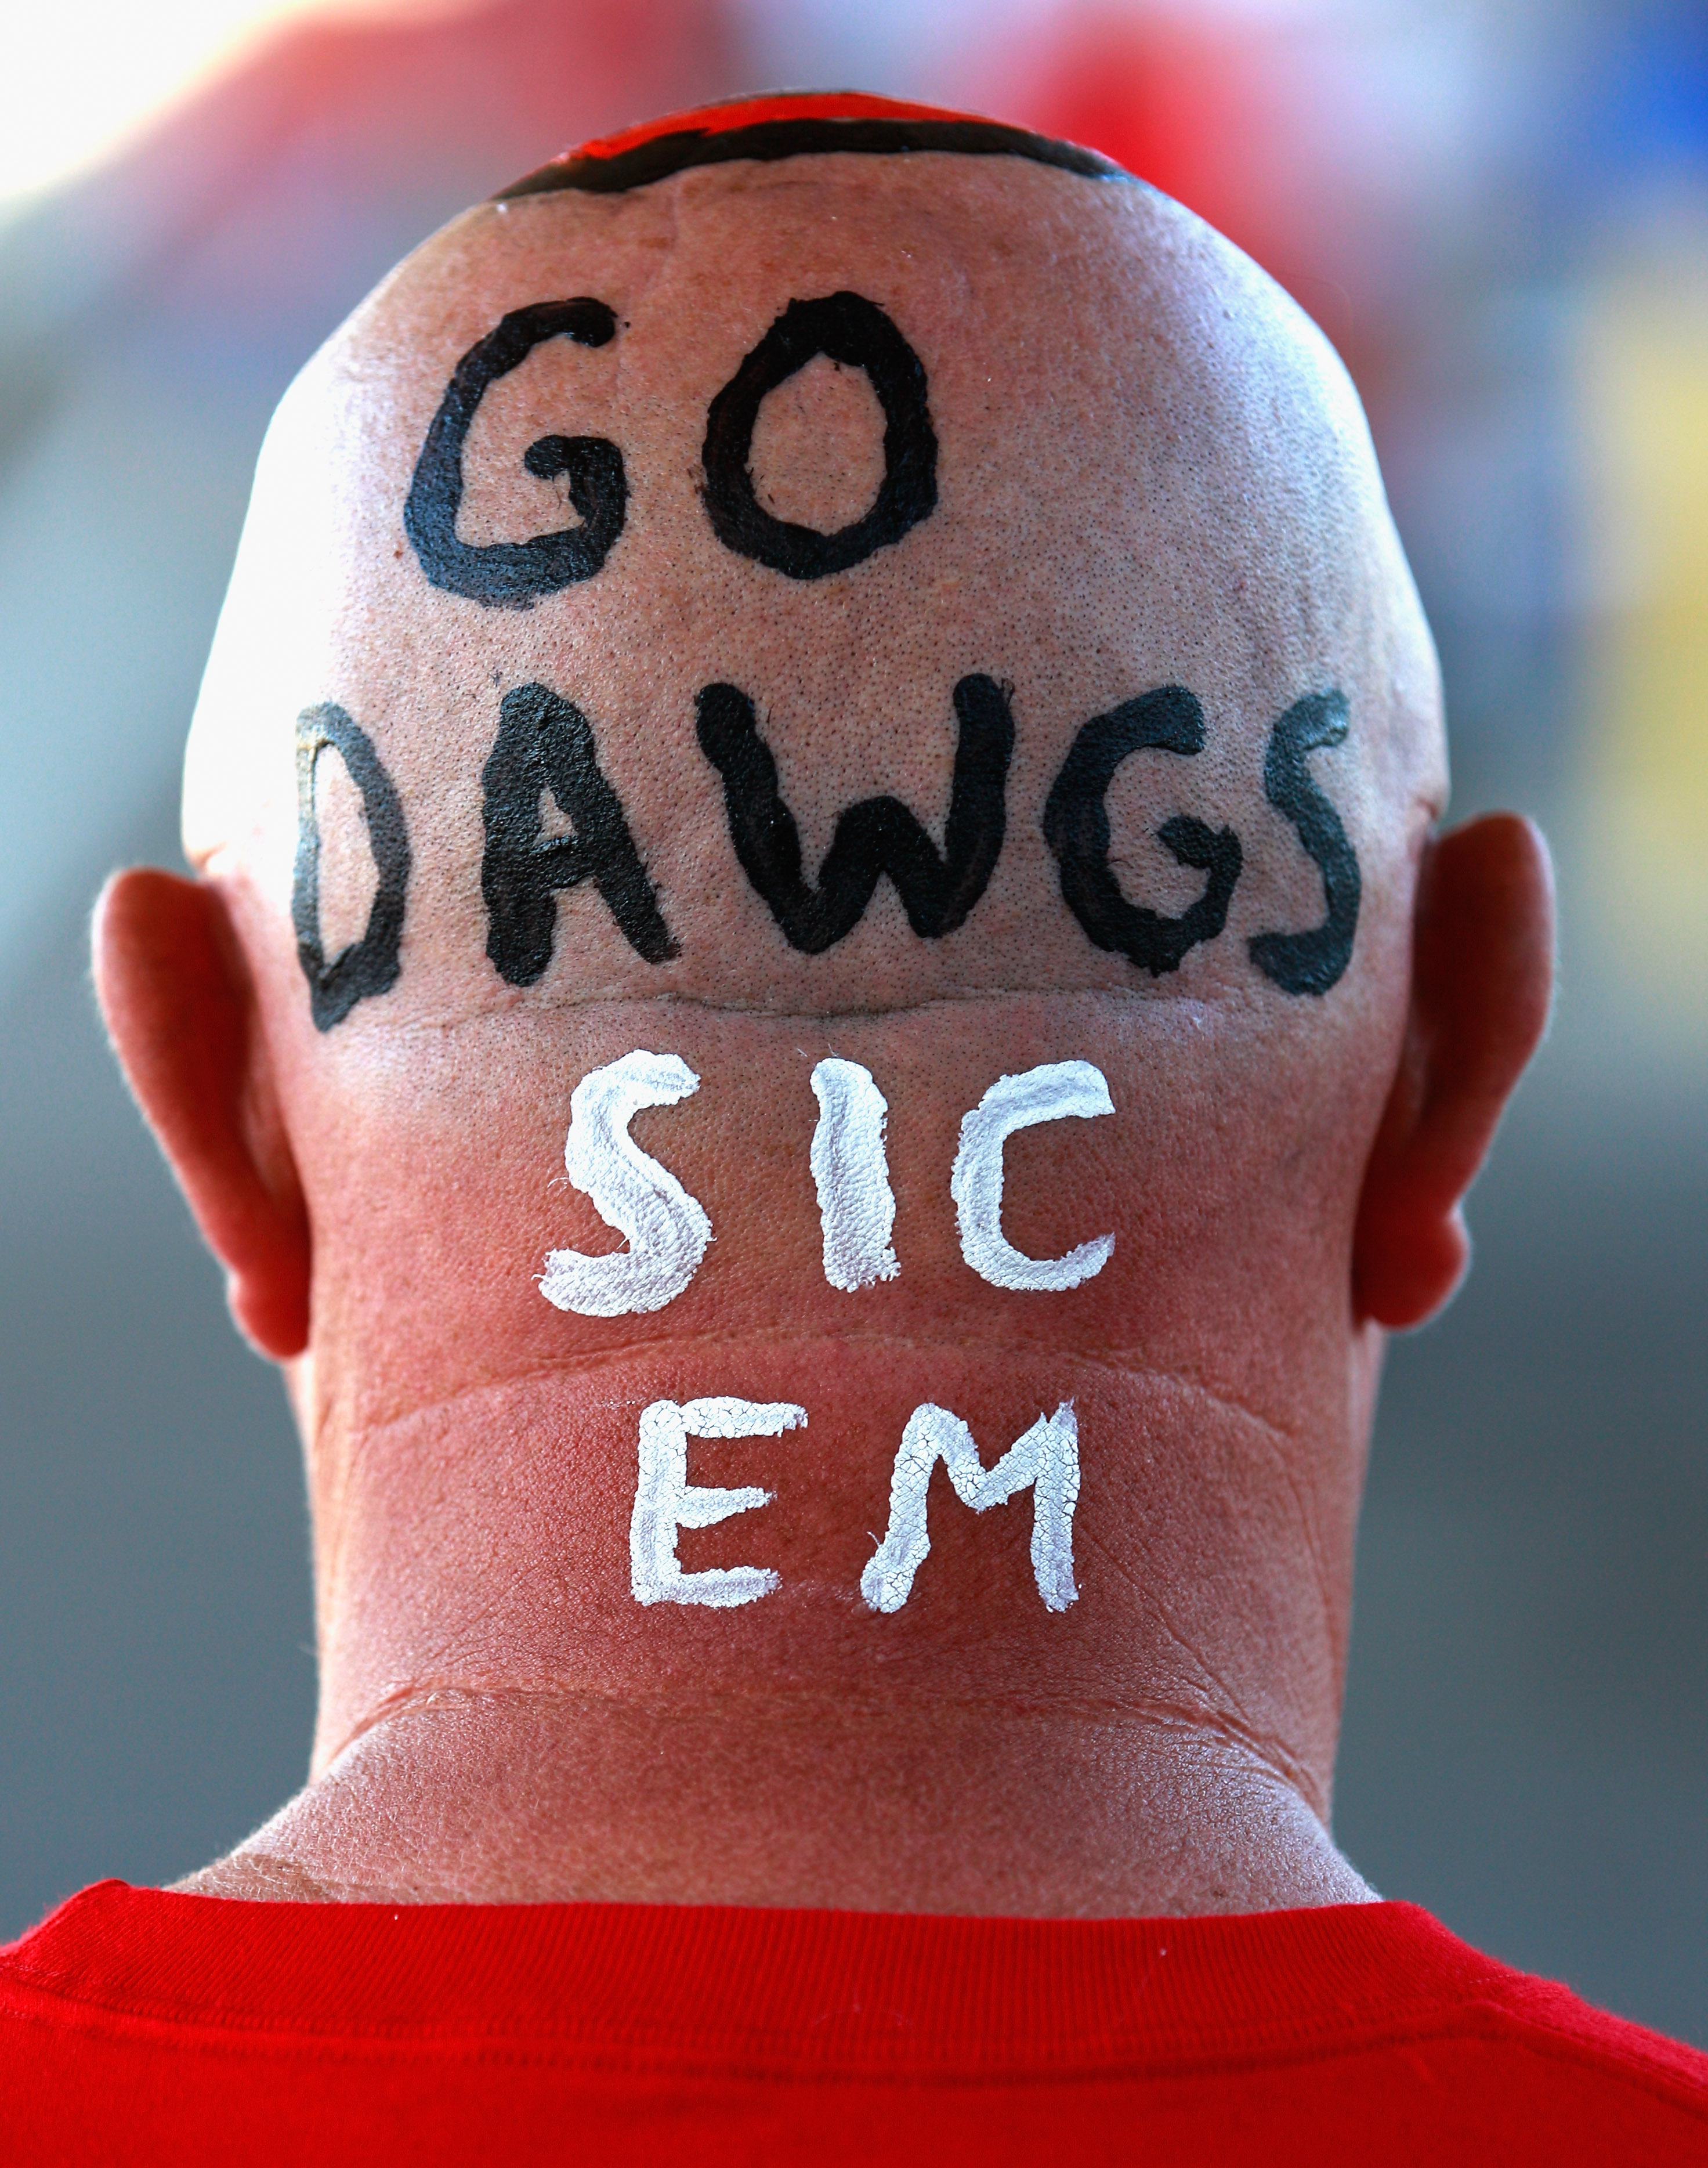 JACKSONVILLE, FL - OCTOBER 30:  A fan shows support for the Georgia Bulldogs prior to the game against the Florida Gators at EverBank Field on October 30, 2010 in Jacksonville, Florida.  (Photo by Sam Greenwood/Getty Images)